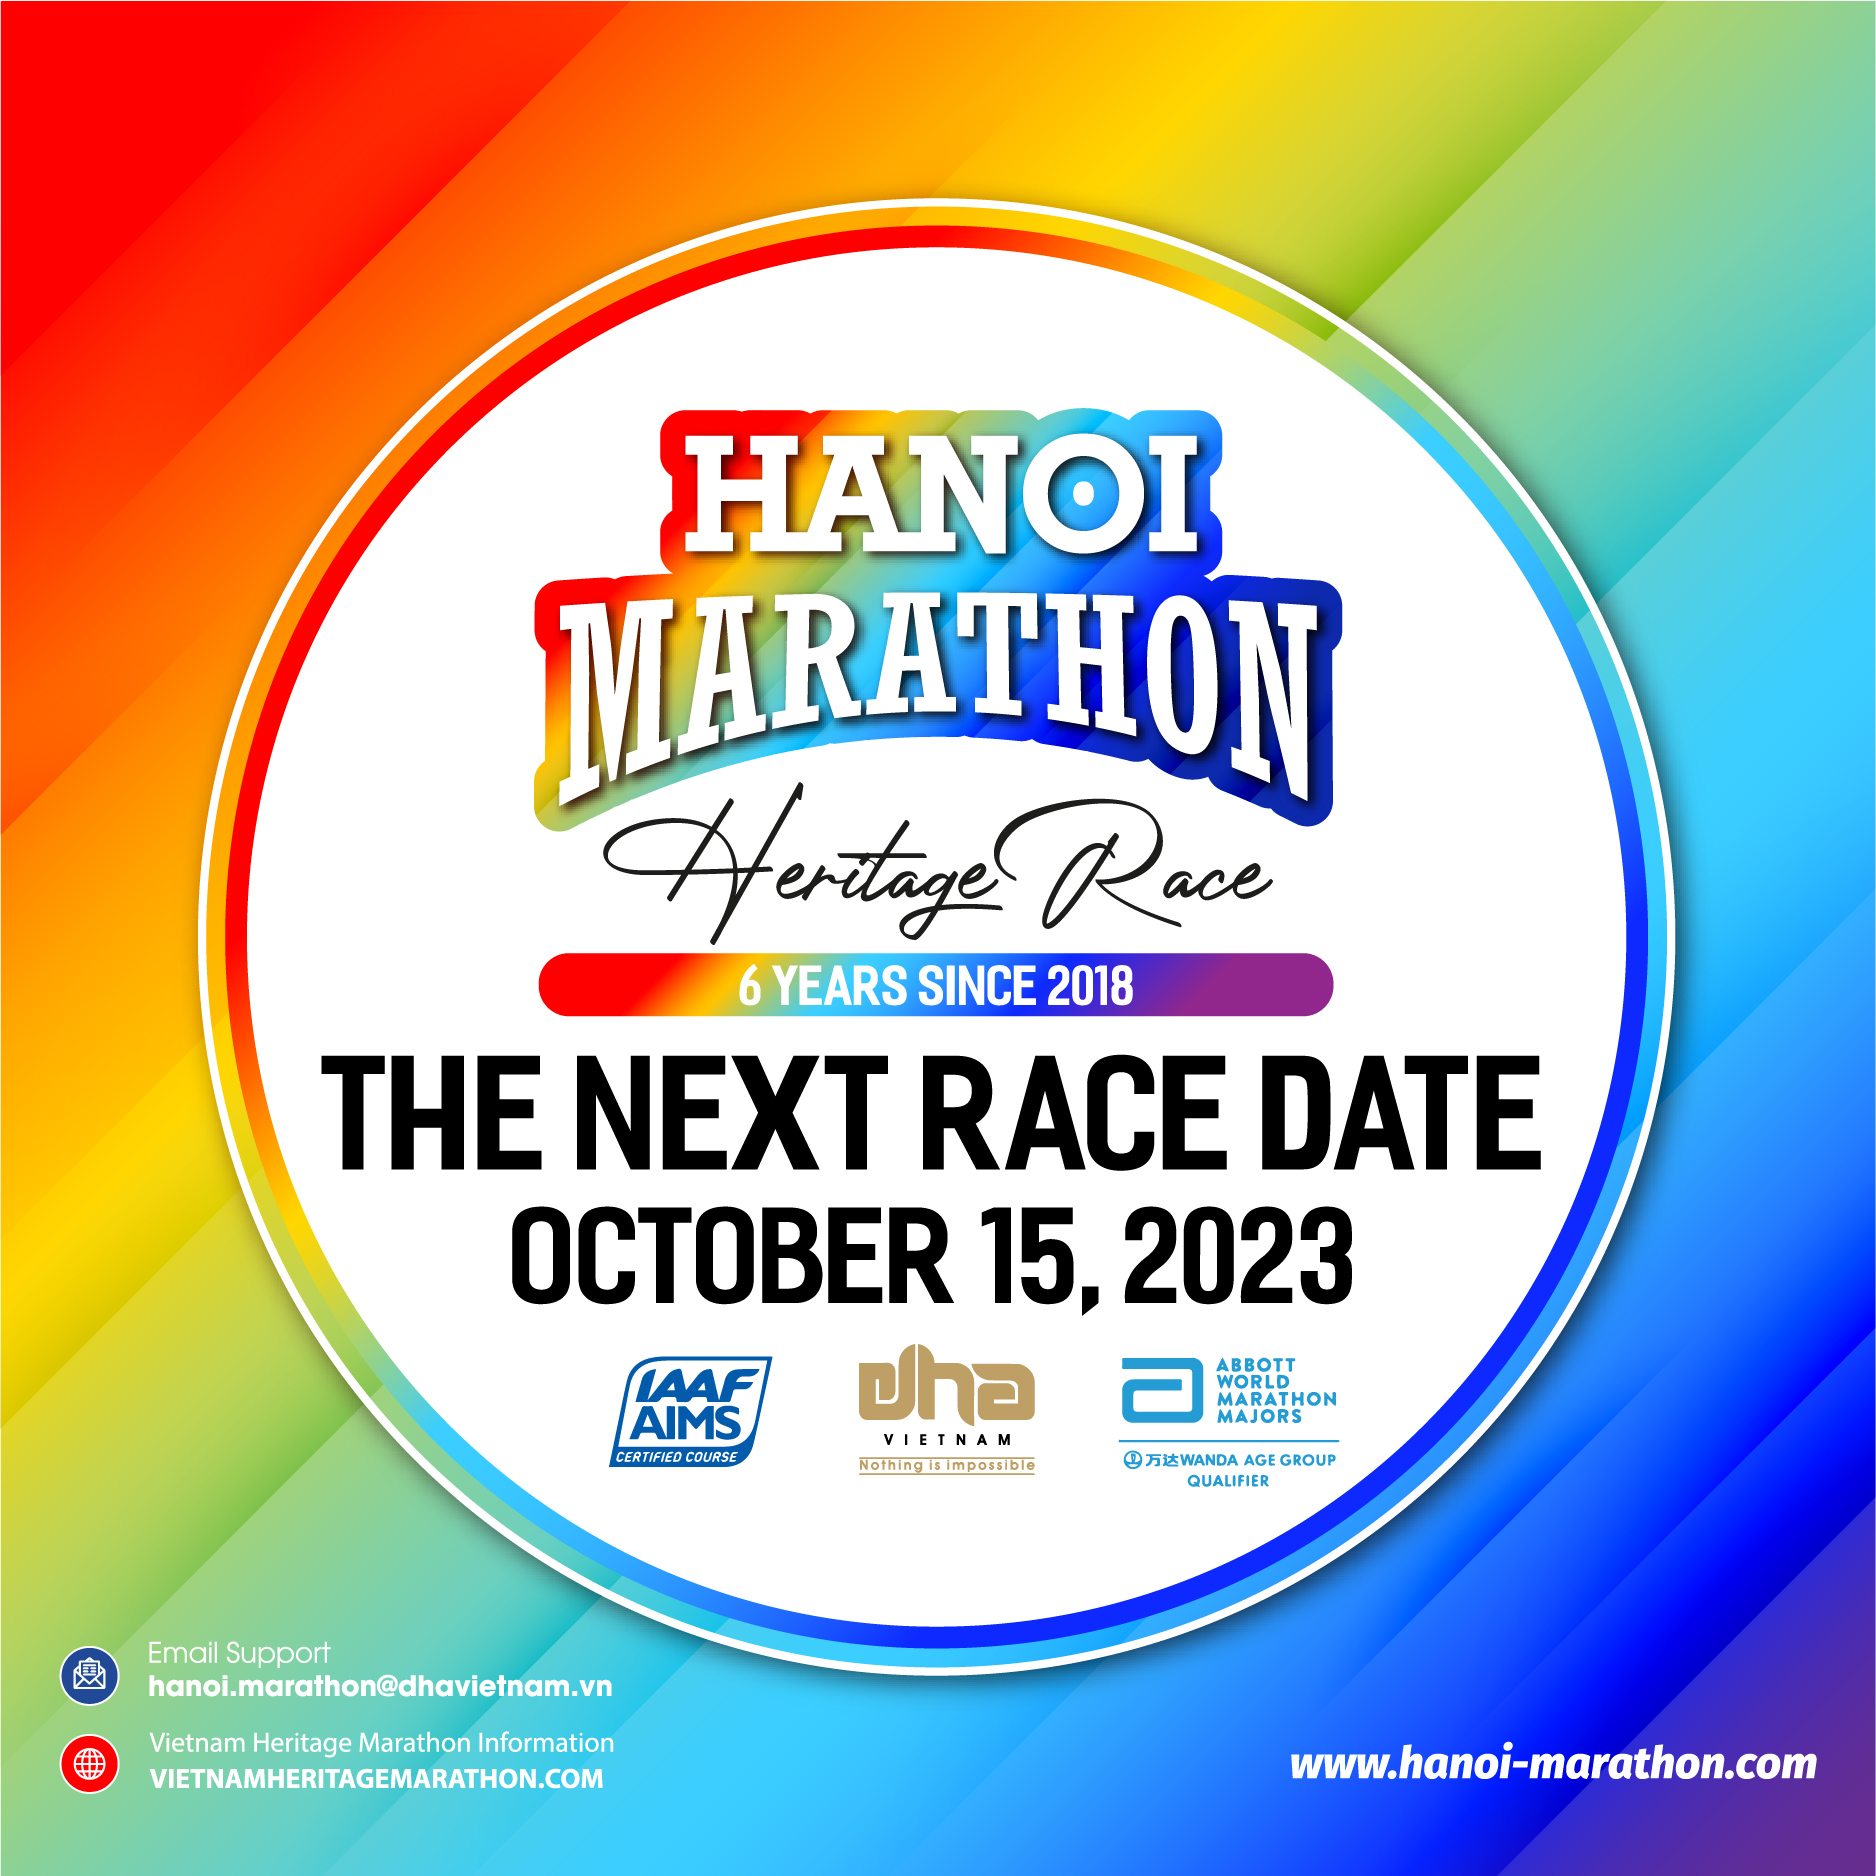 Hanoi Marathon - Heritage Race Registration Reopens By March 8